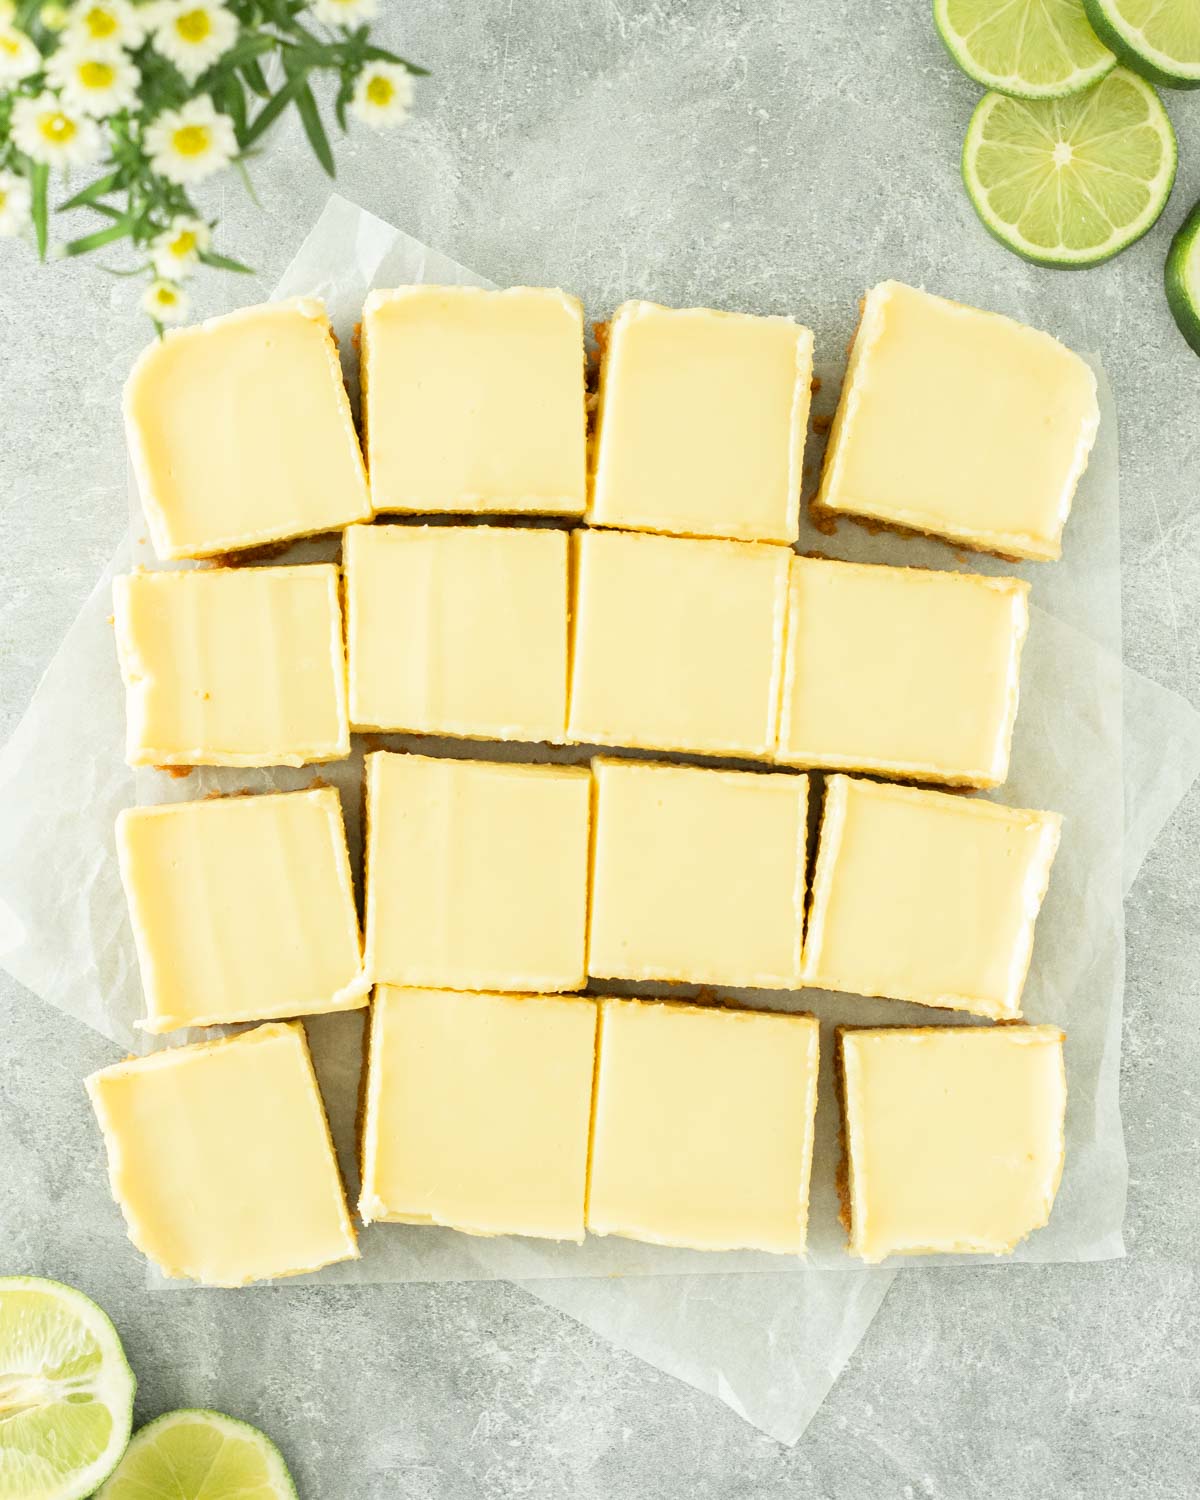 These key lime pie bars are a delicious spring and summer dessert made with a simple homemade crust and topped with a 3-ingredient key lime topping. This dessert bar recipe is perfect to serve at a holiday, party and great for a Fourth of July dessert.